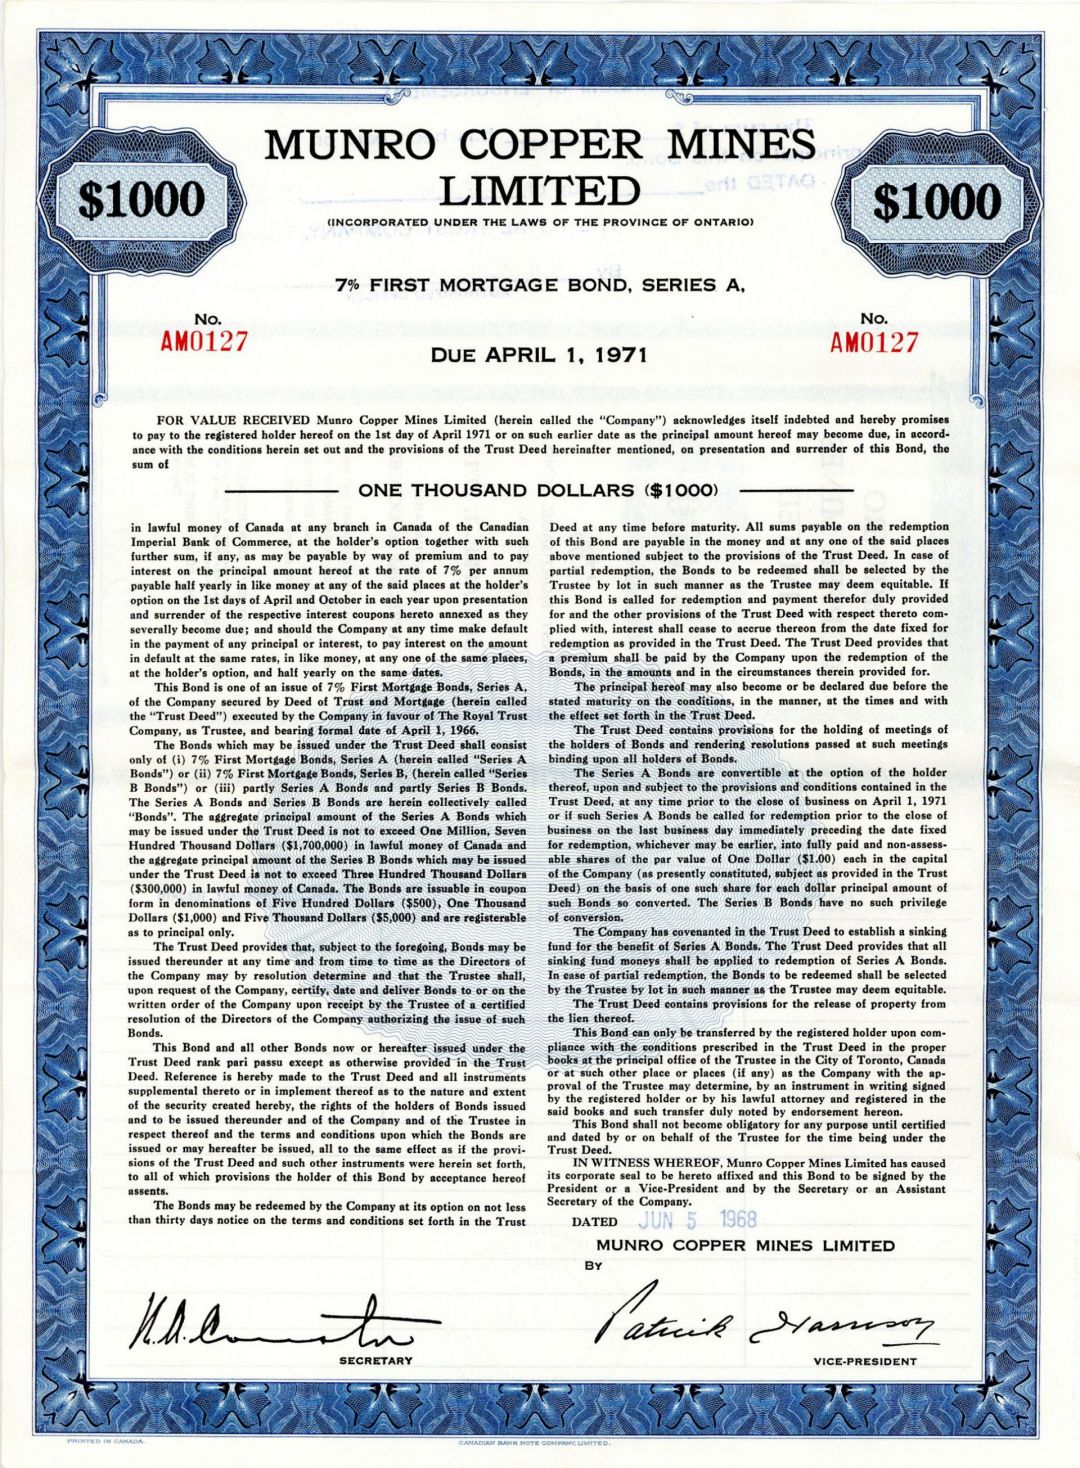 Munro Copper Mines Limited - $1,000 Foreign Bond